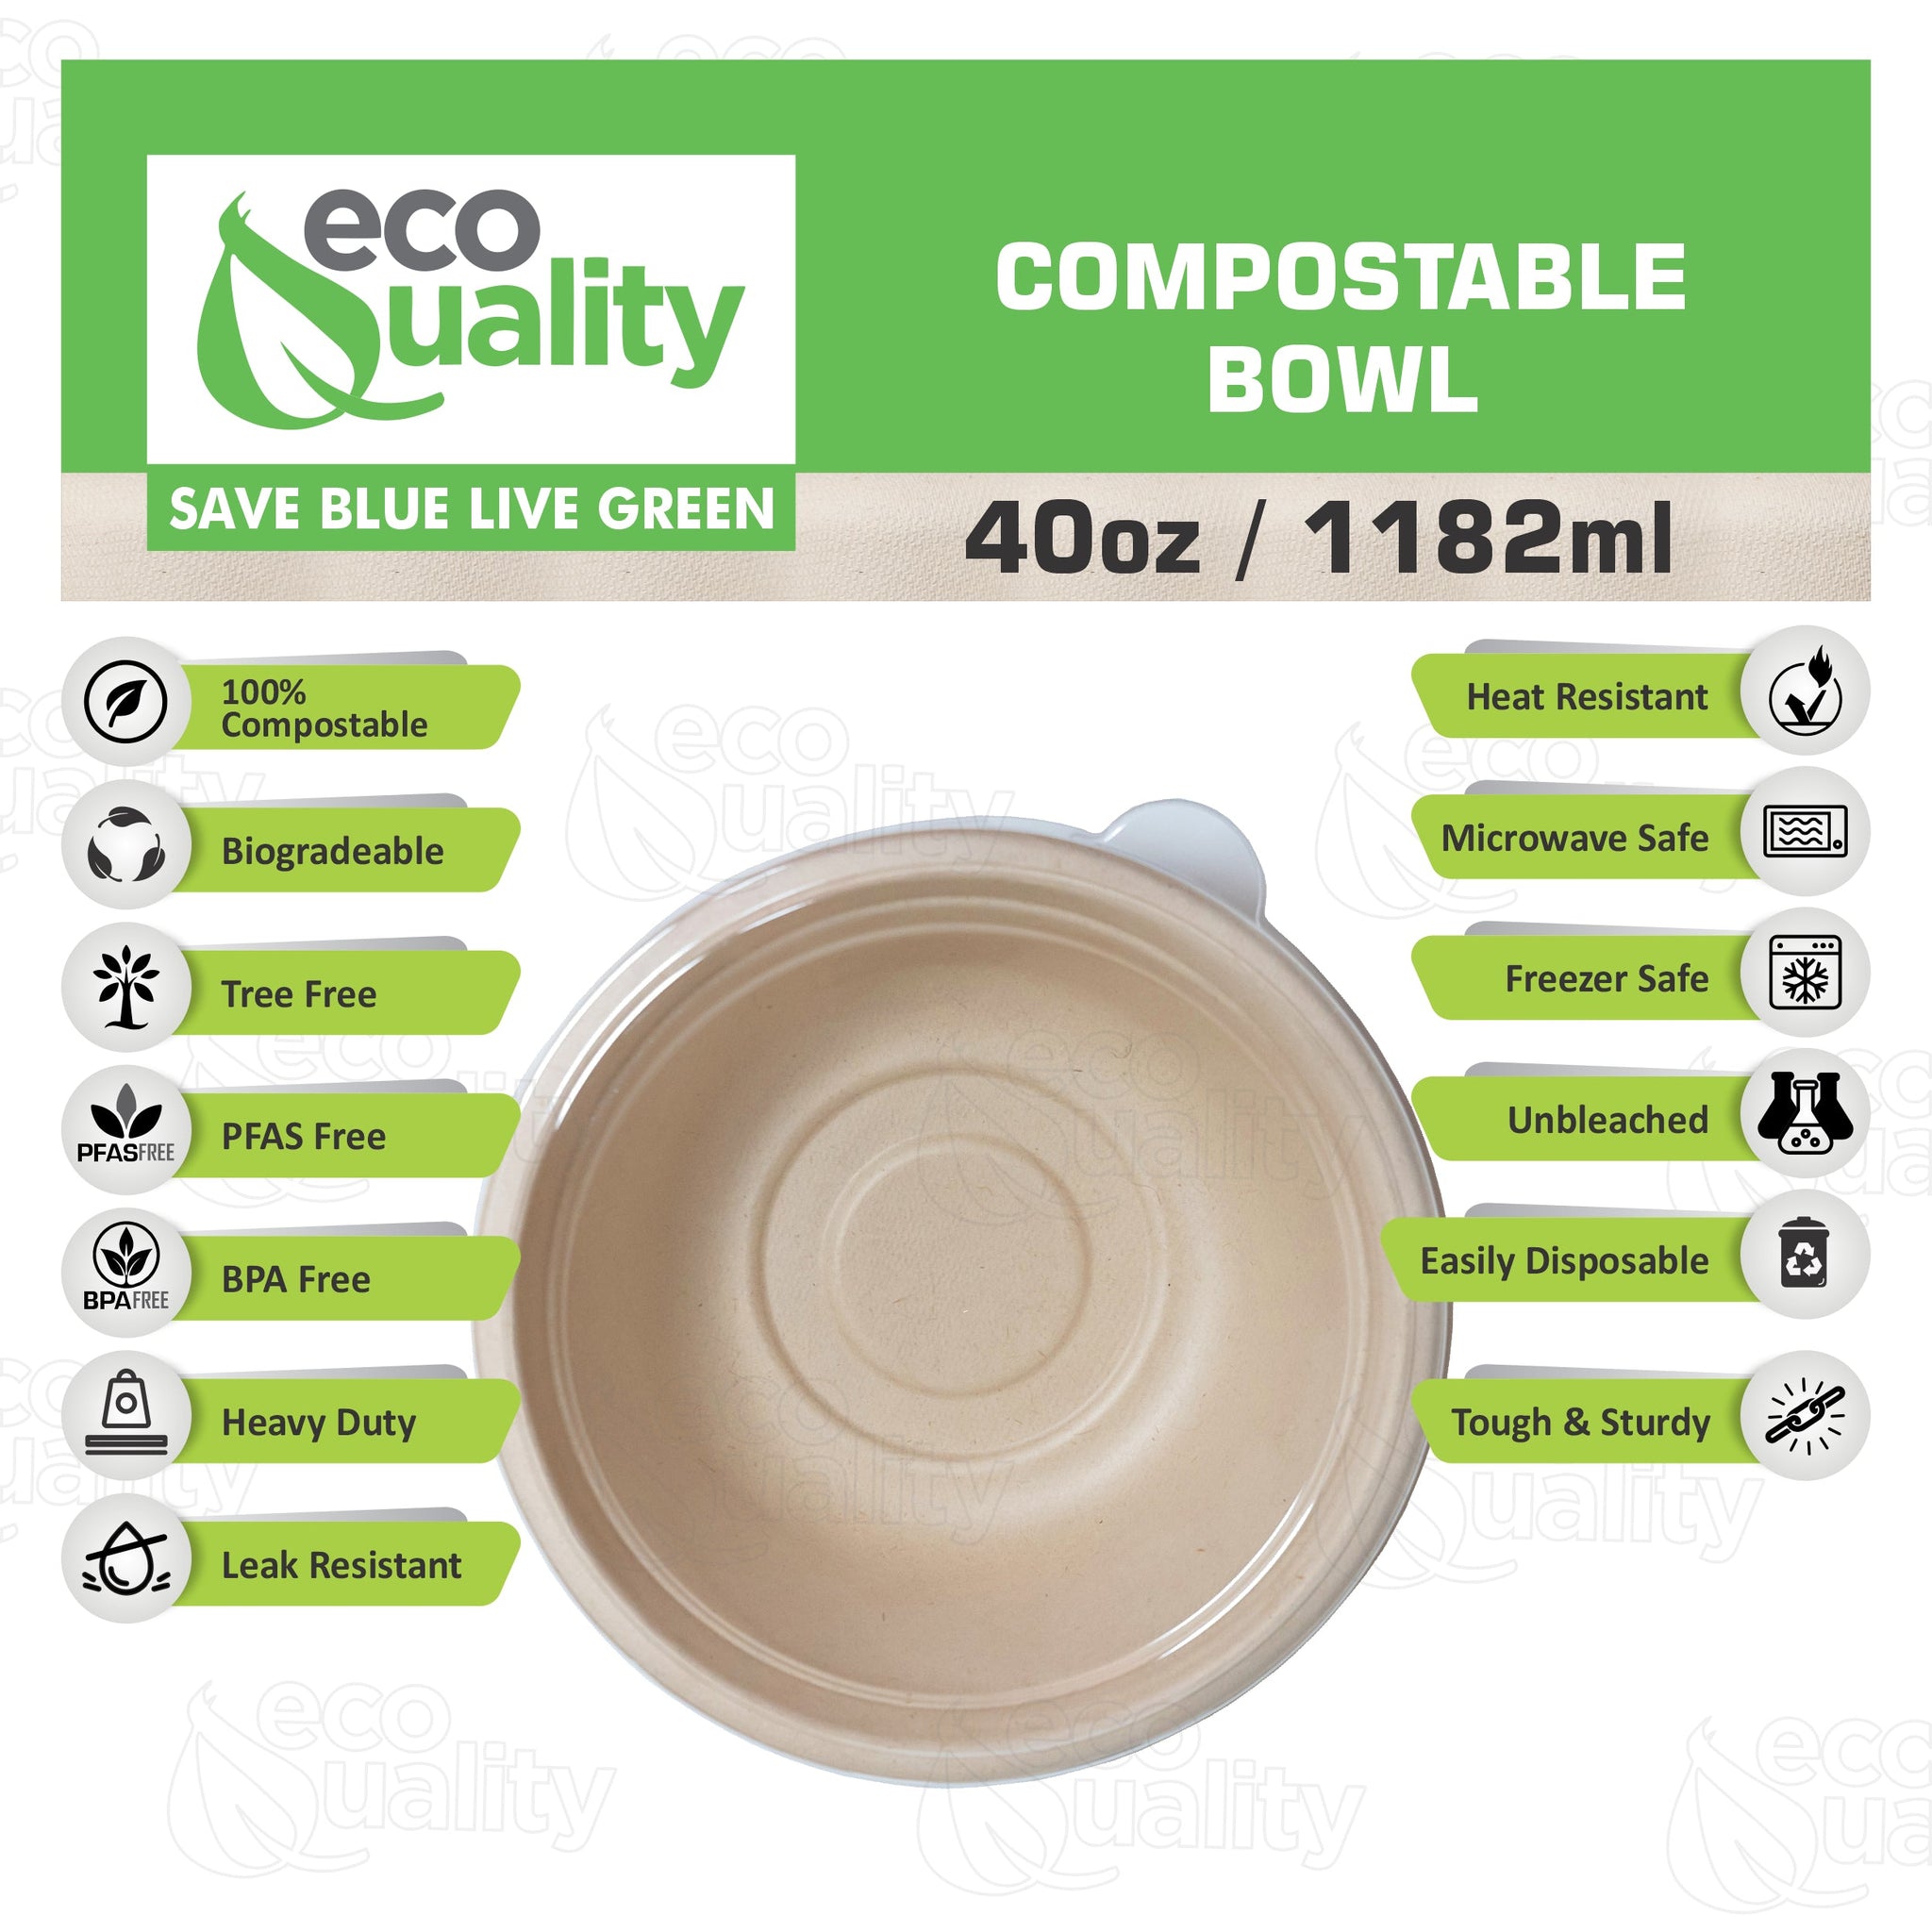 Compostable Heavy Duty Disposable Bowls with Lids, Ecofriendly, Bagasse Unbleached Bamboo, Biodegradable, Tree Free, Heat & Liquid Resistant Bowl